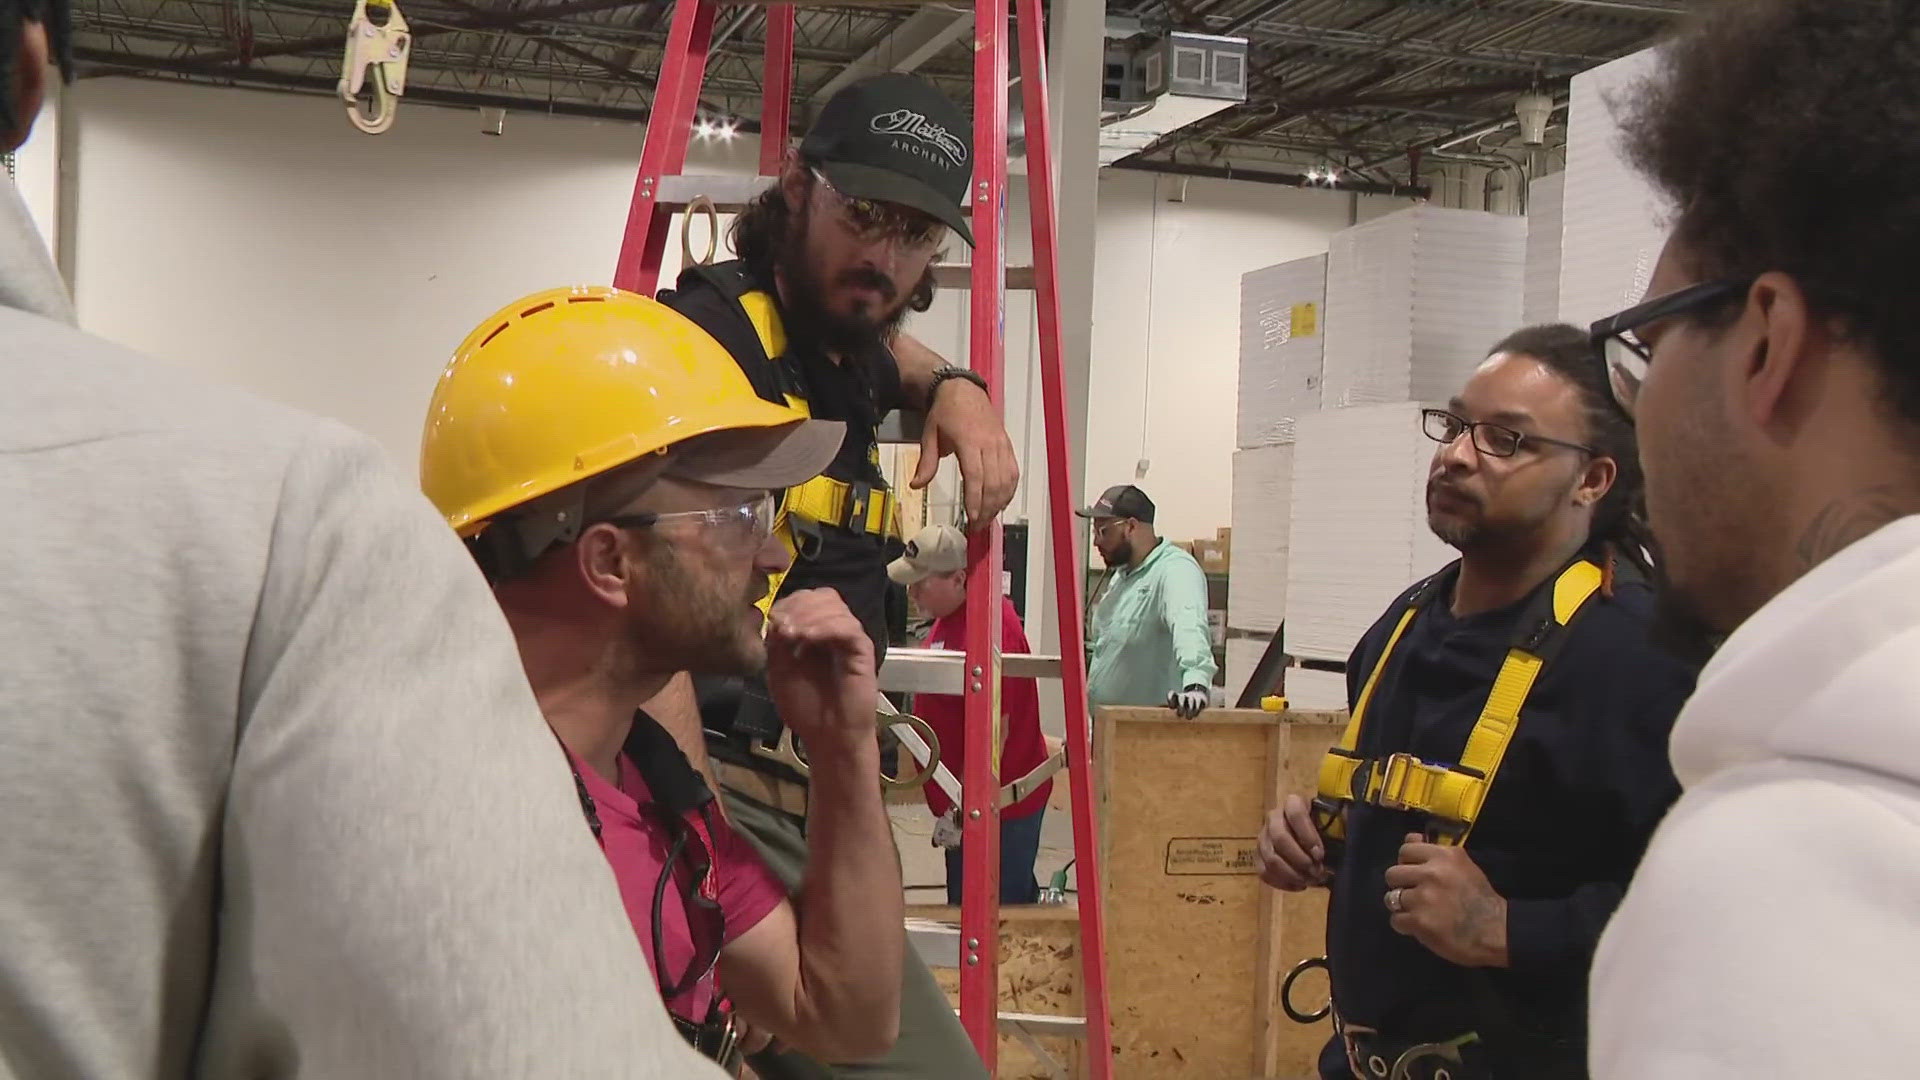 At GAF Roofing Academy, industry experts are training new workers for free. They said they could use at least 100 more roofers in the St. Louis area.